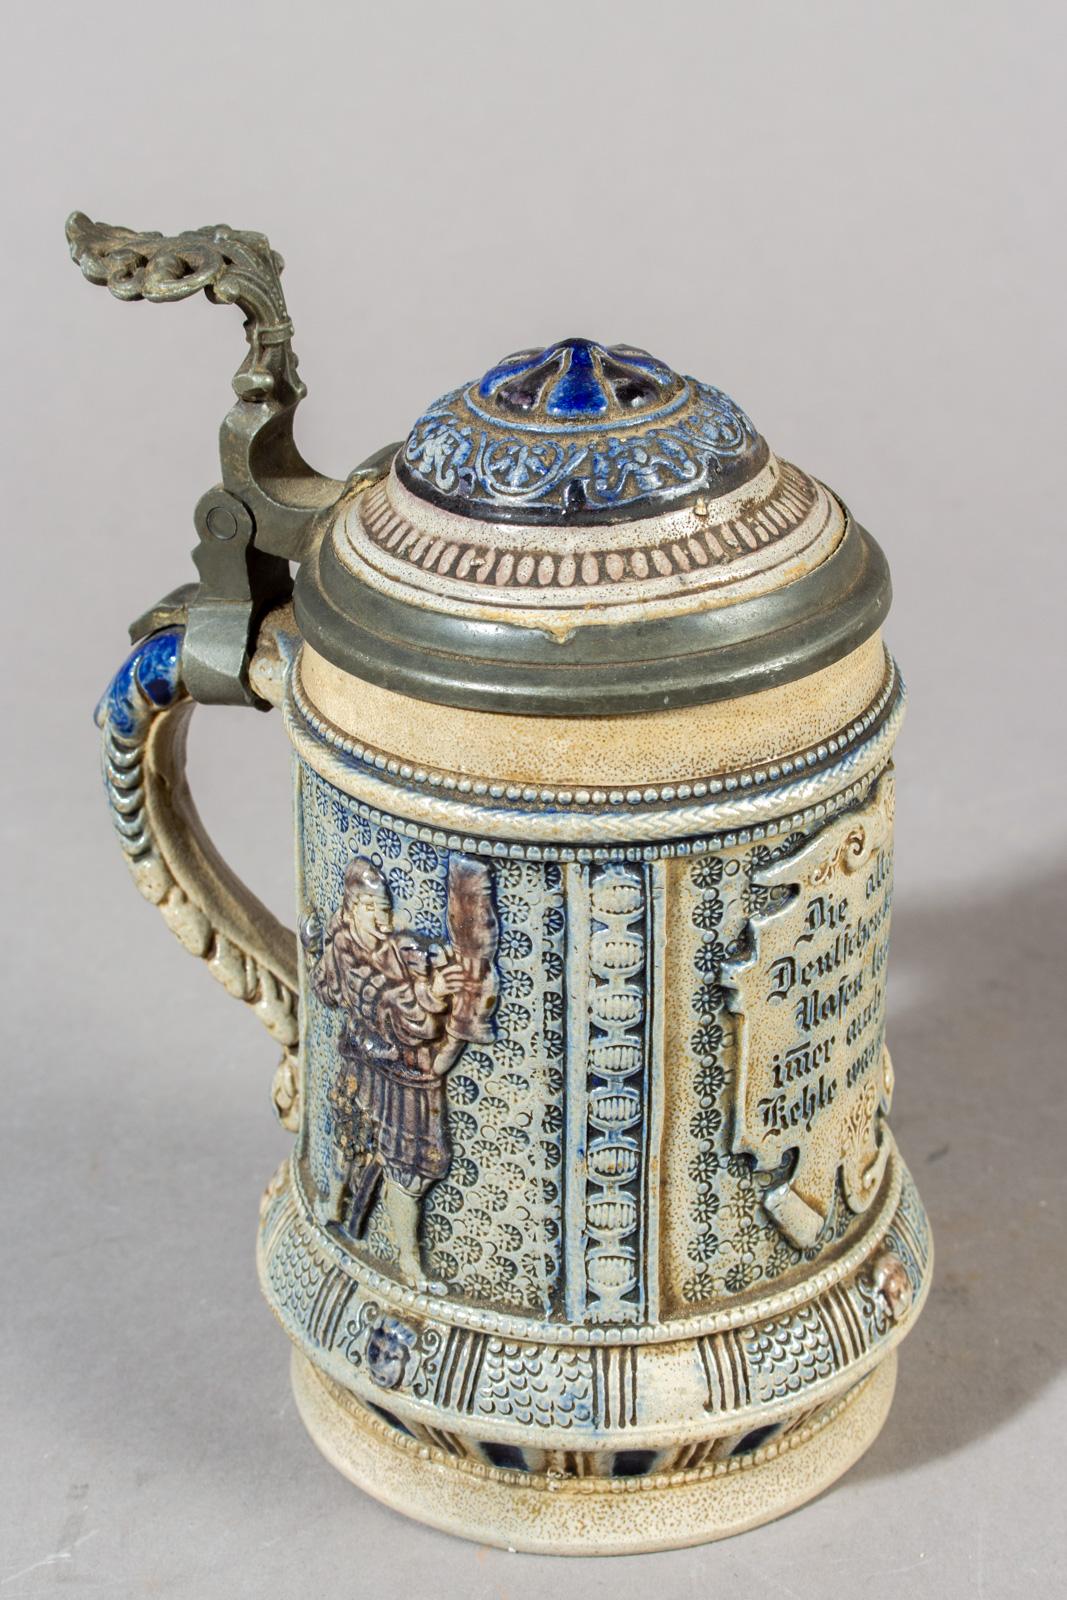 Stoneware 1/2l beer stein with an original pewter hinged lid. The body is decorated with a player, original craquelure.
Made in Germany, circa 1890.